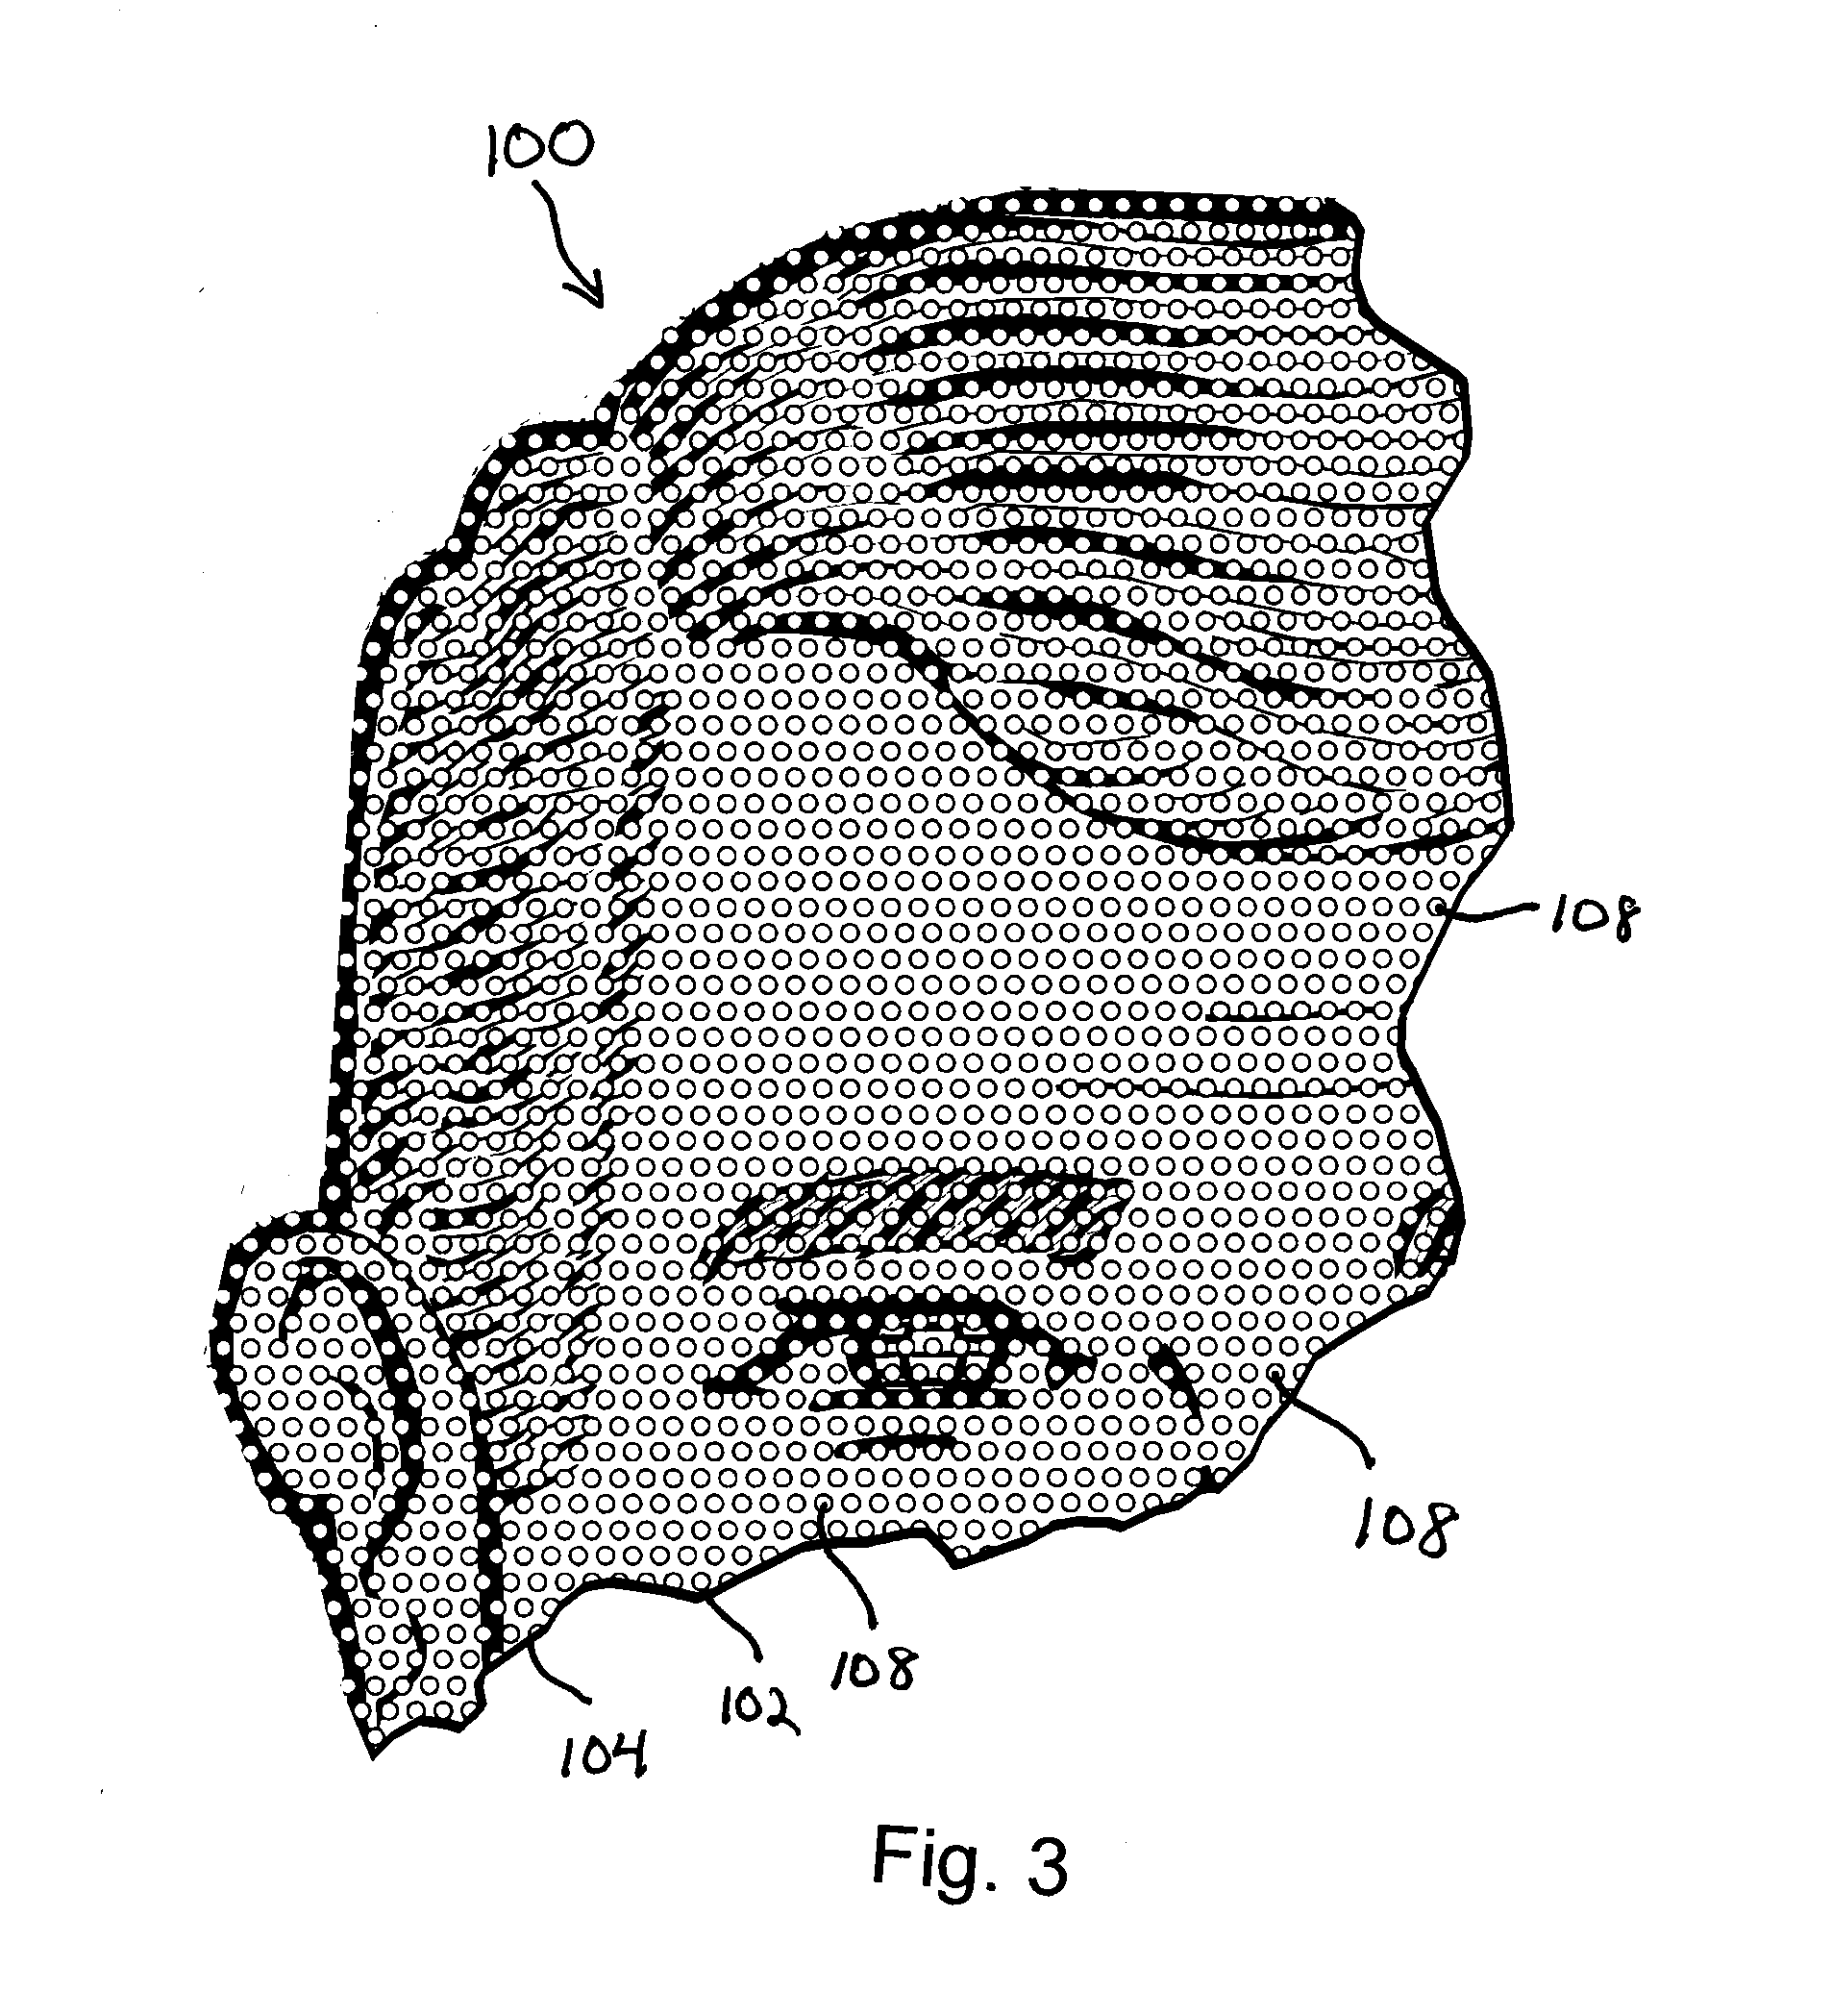 Printable facial mask and printable facial mask system with enhanced peripheral visibility